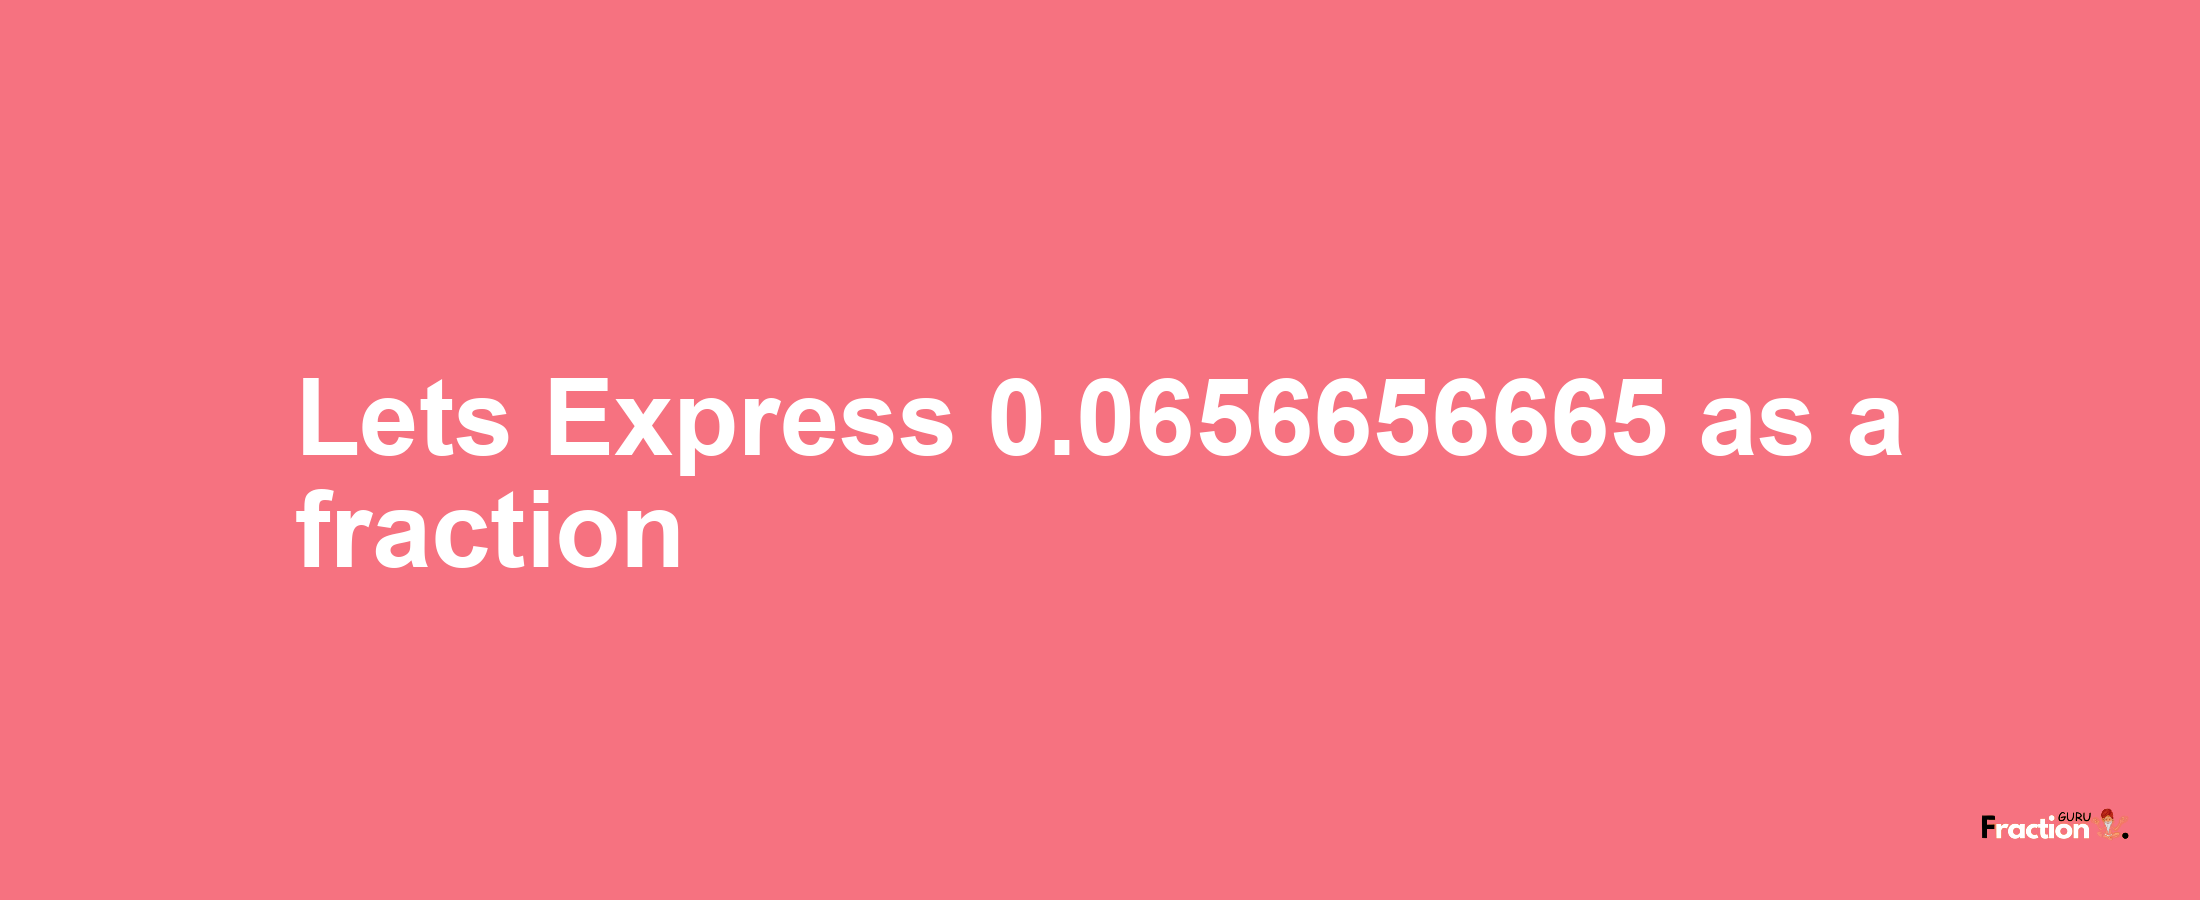 Lets Express 0.0656656665 as afraction